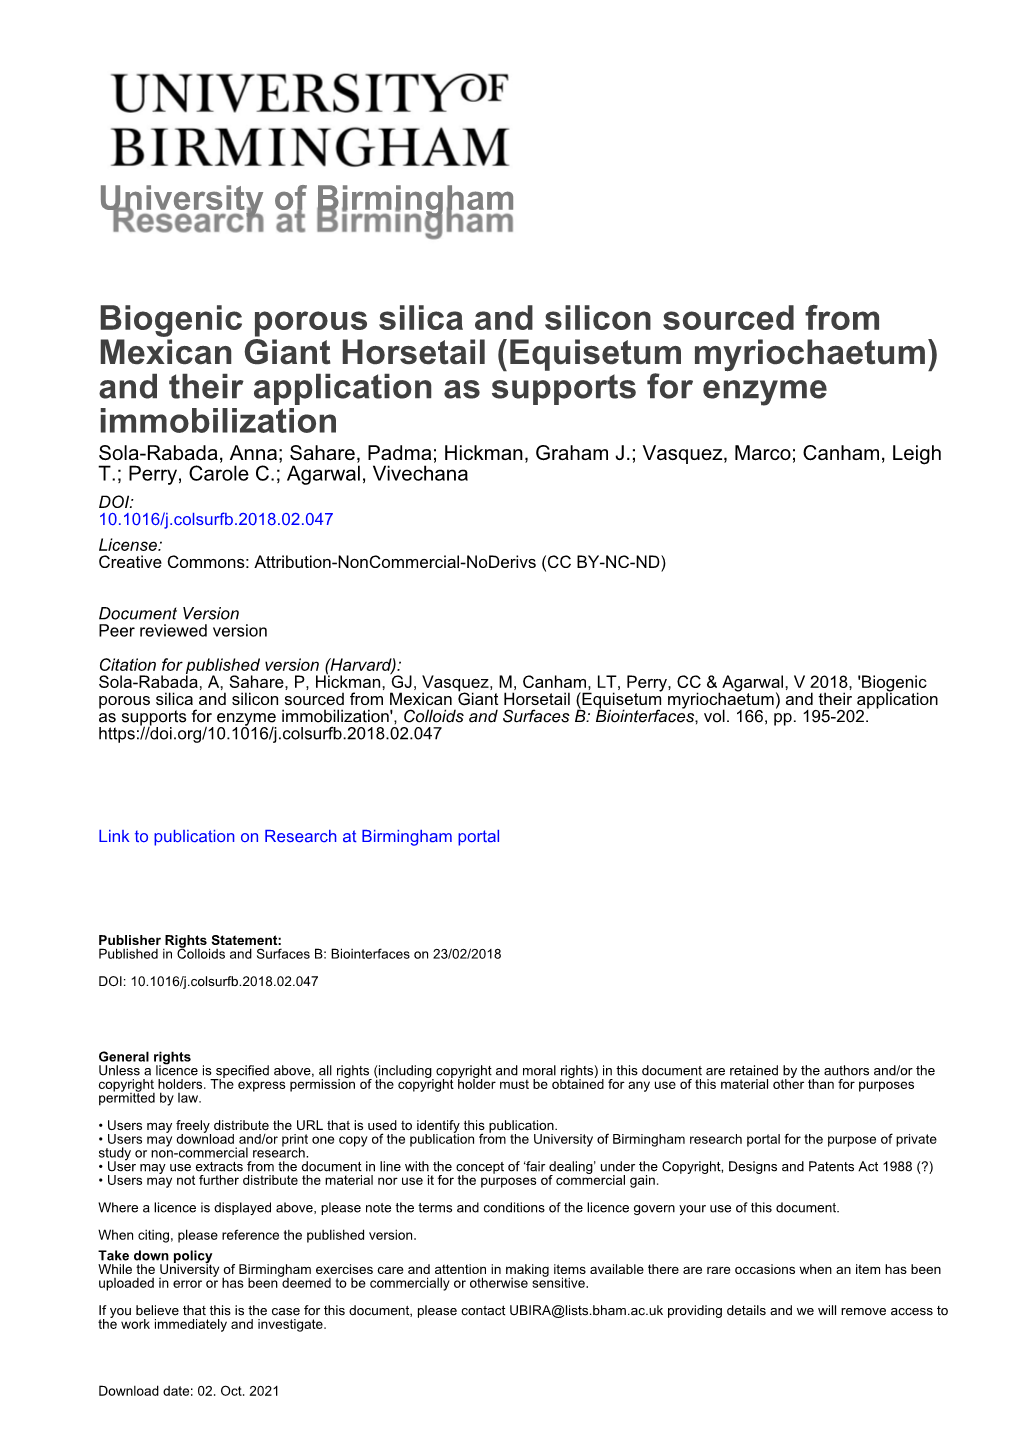 Biogenic Porous Silica and Silicon Sourced from Mexican Giant Horsetail